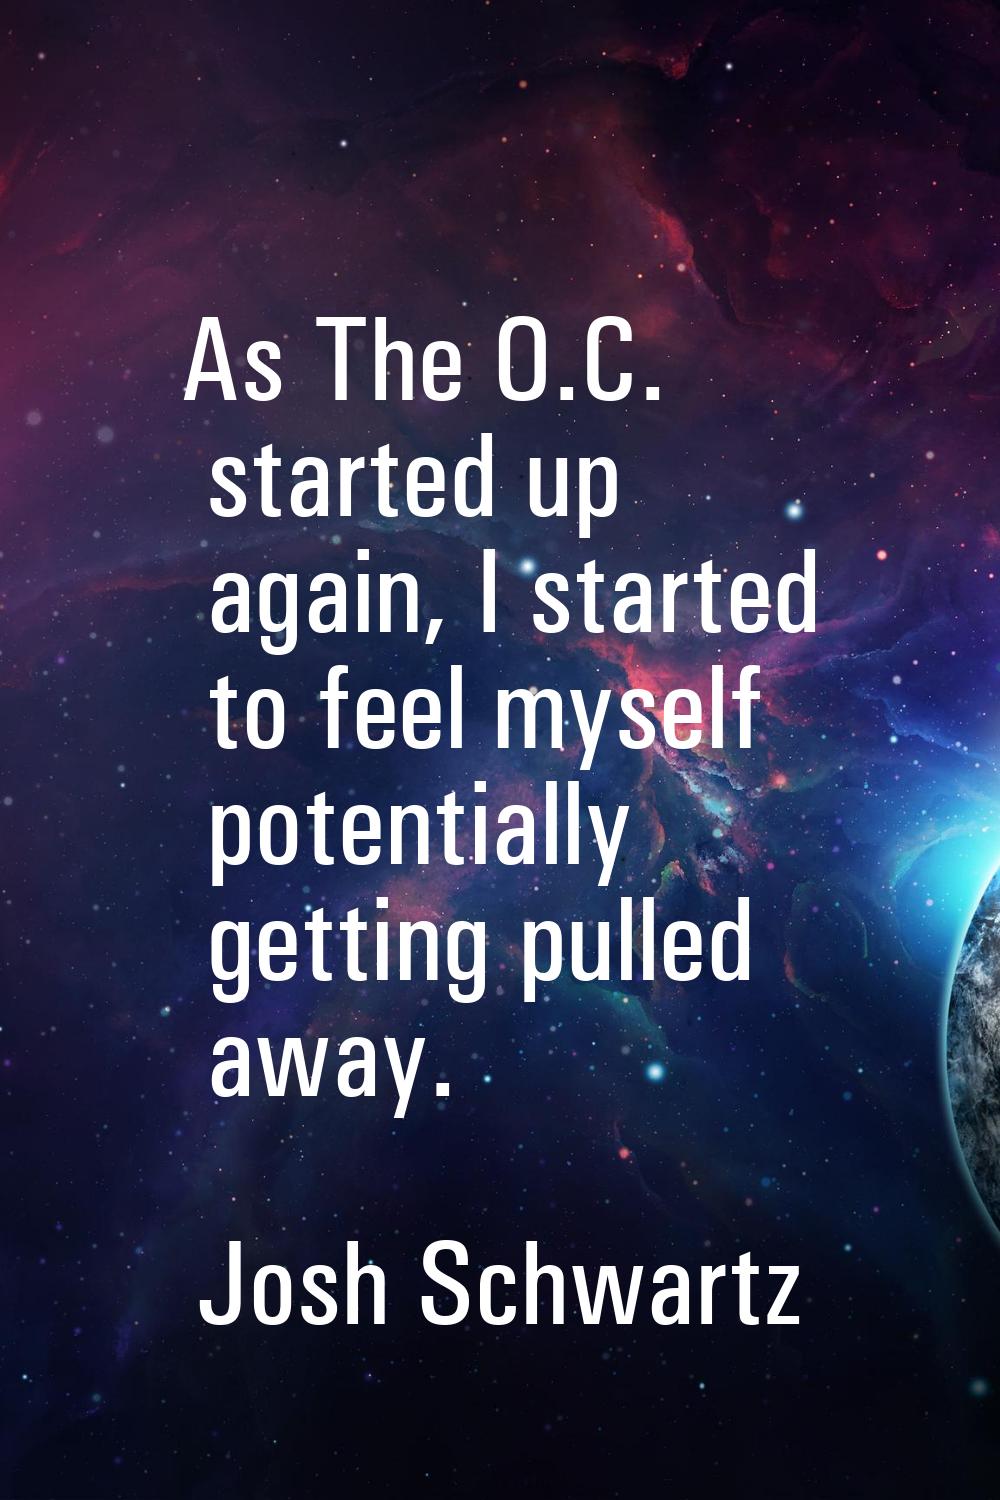 As The O.C. started up again, I started to feel myself potentially getting pulled away.